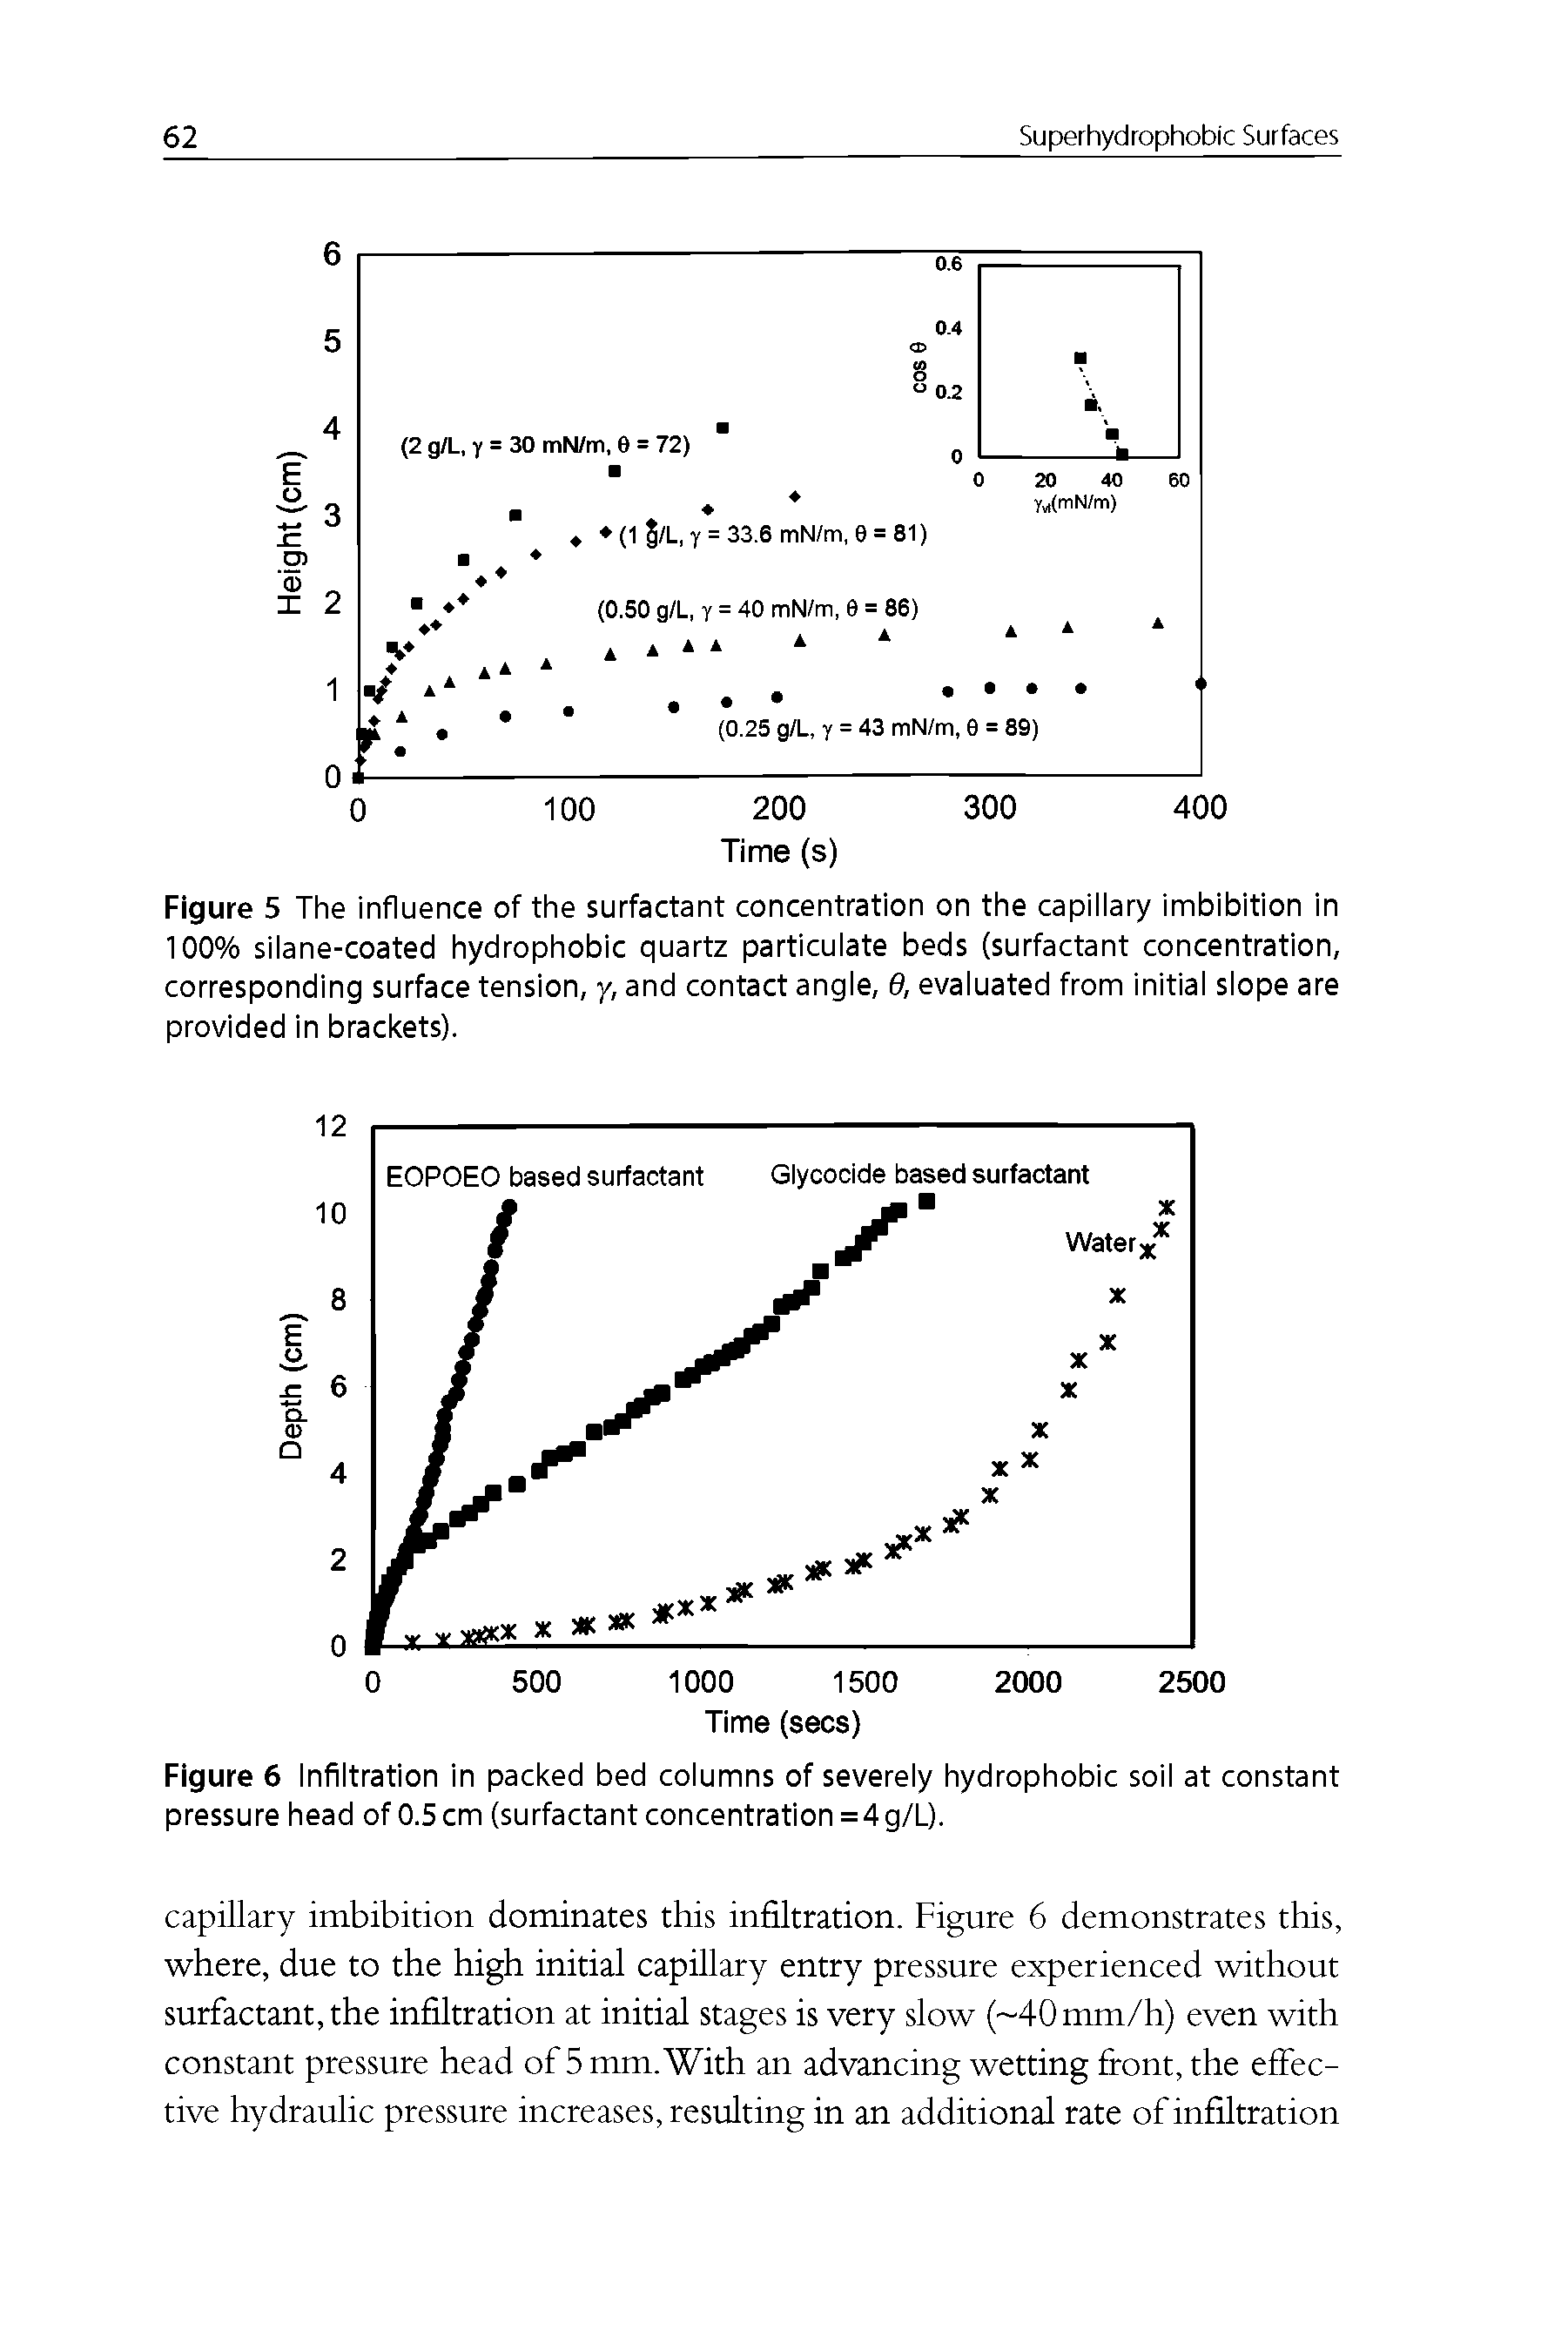 Figure 5 The influence of the surfactant concentration on the capillary Imbibition In 100% silane-coated hydrophobic quartz particulate beds (surfactant concentration, corresponding surface tension, y, and contact angle, 9, evaluated from Initial slope are provided In brackets).